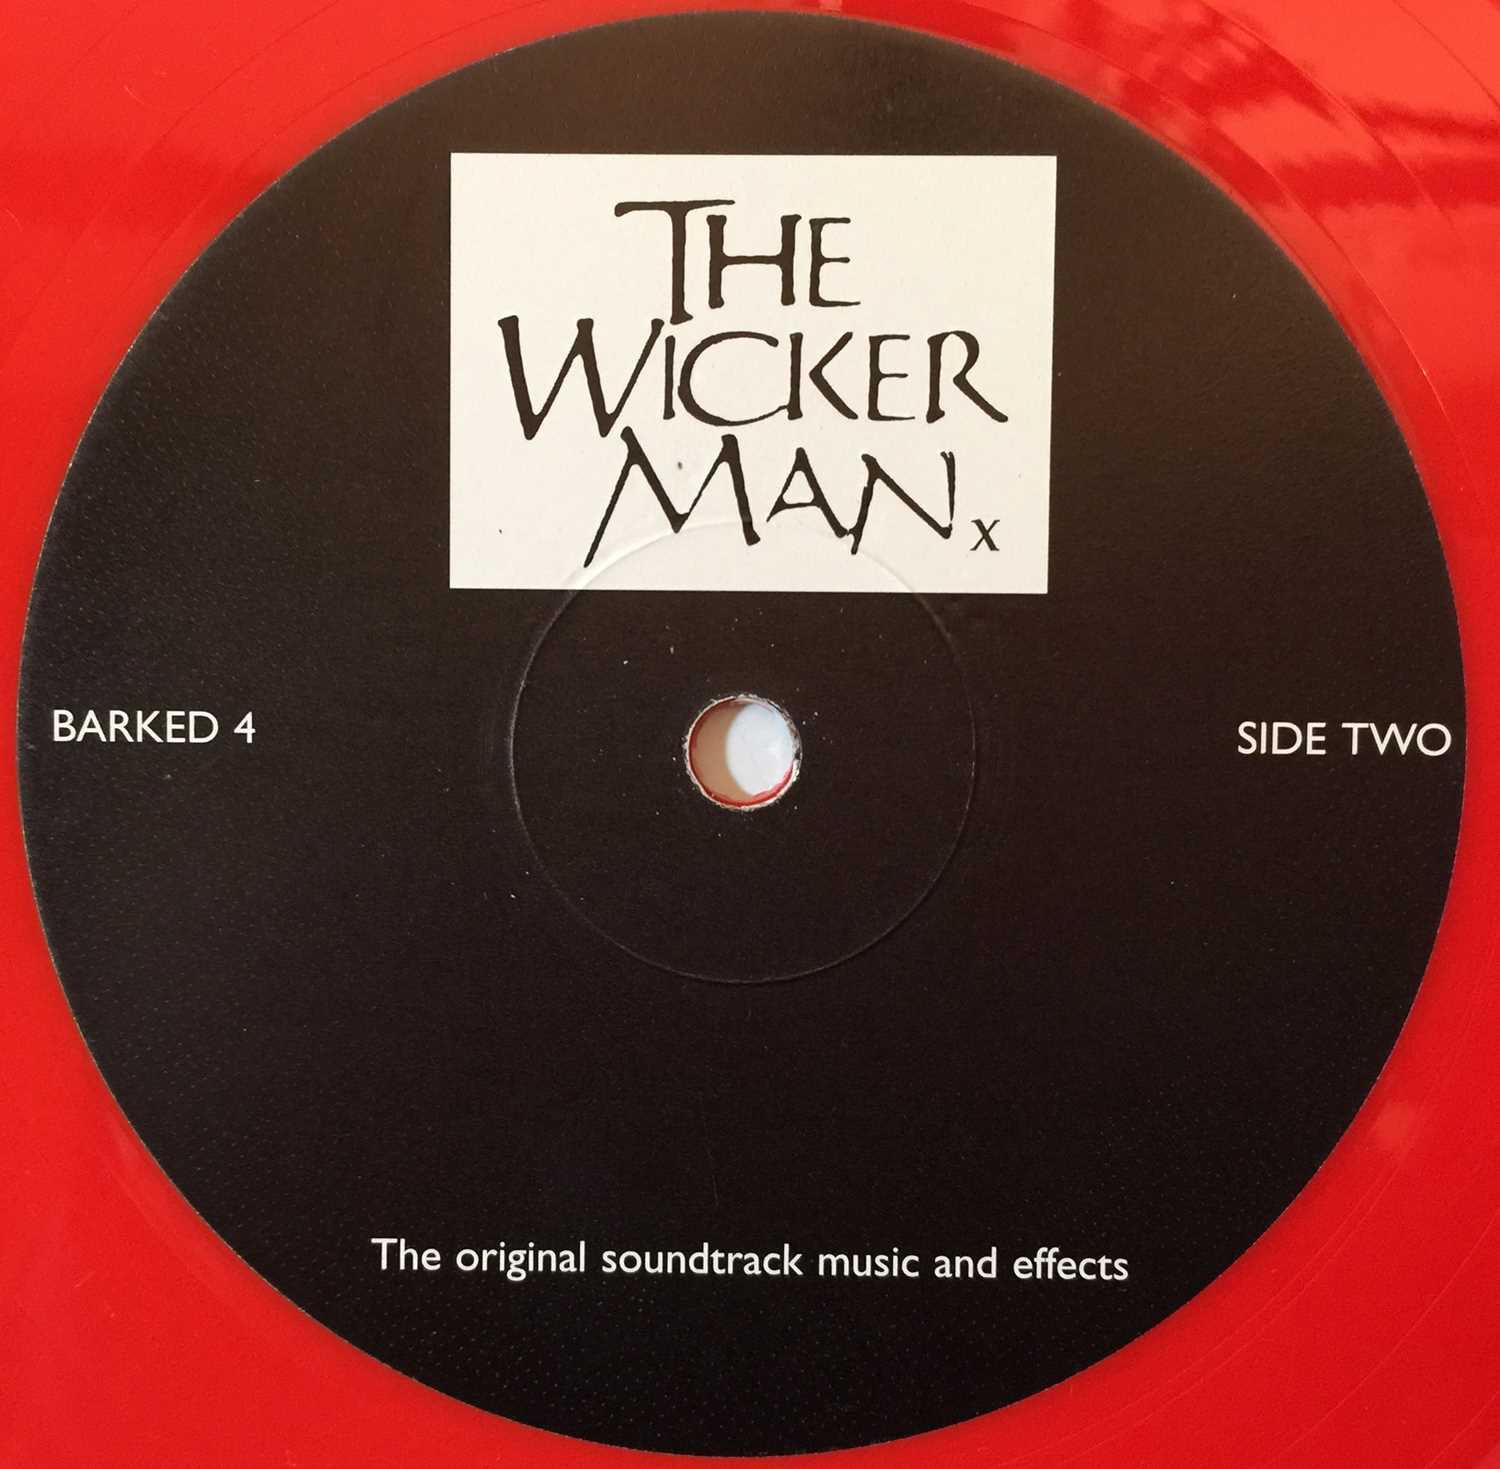 MAGNET AND PAUL GIOVANNI - THE WICKER MAN LP (ORIGINAL 1998 UK RED VINYL PRESSING - TRUNK RECORDS BA - Image 5 of 6